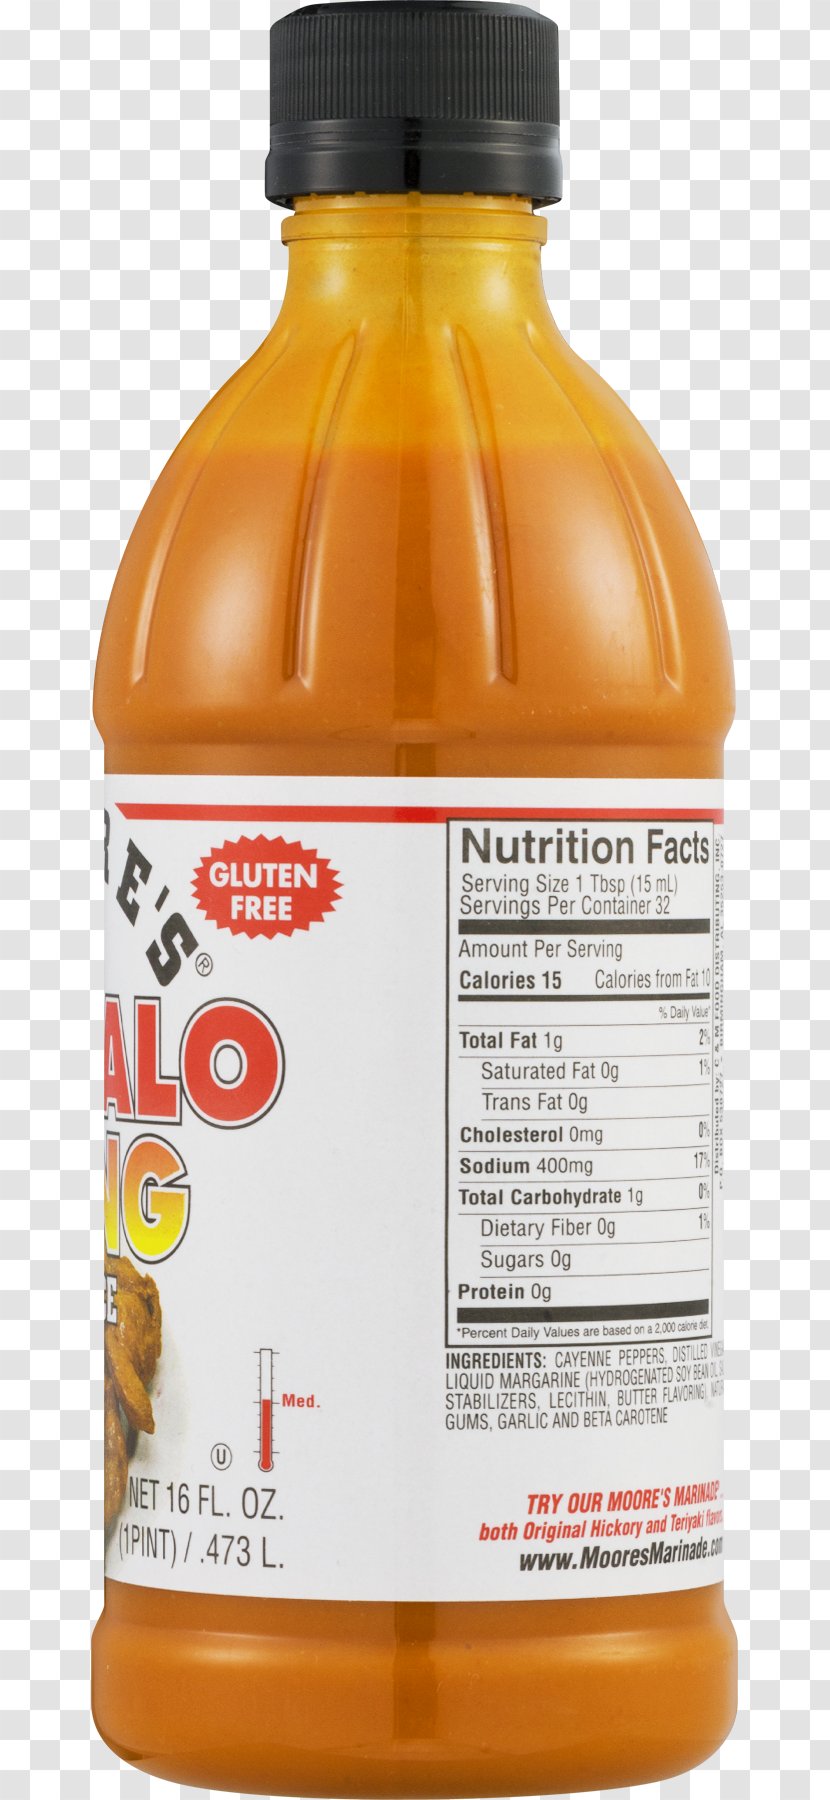 Buffalo Wing Condiment Product Sauce Ounce - Bottle - Cauliflower Wings Transparent PNG